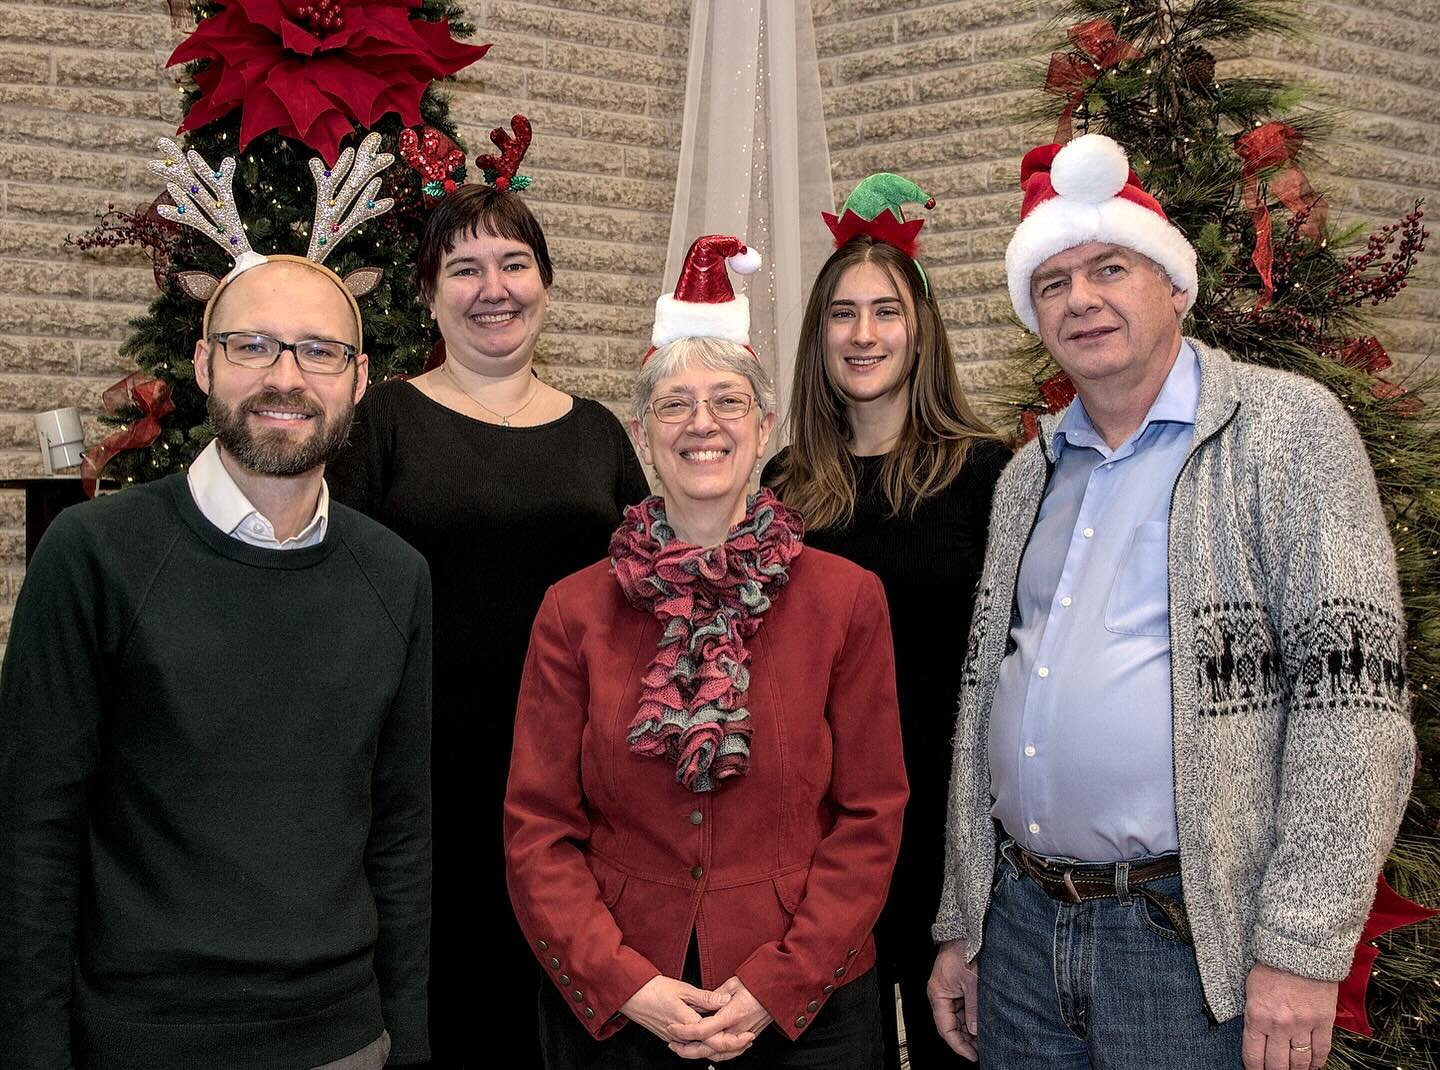 Merry Christmas from the office staff at Bethel! We wish all of you a meaningful time of celebration as we give thanks for the birth of Jesus who is our Emmanuel &ndash; God with us.